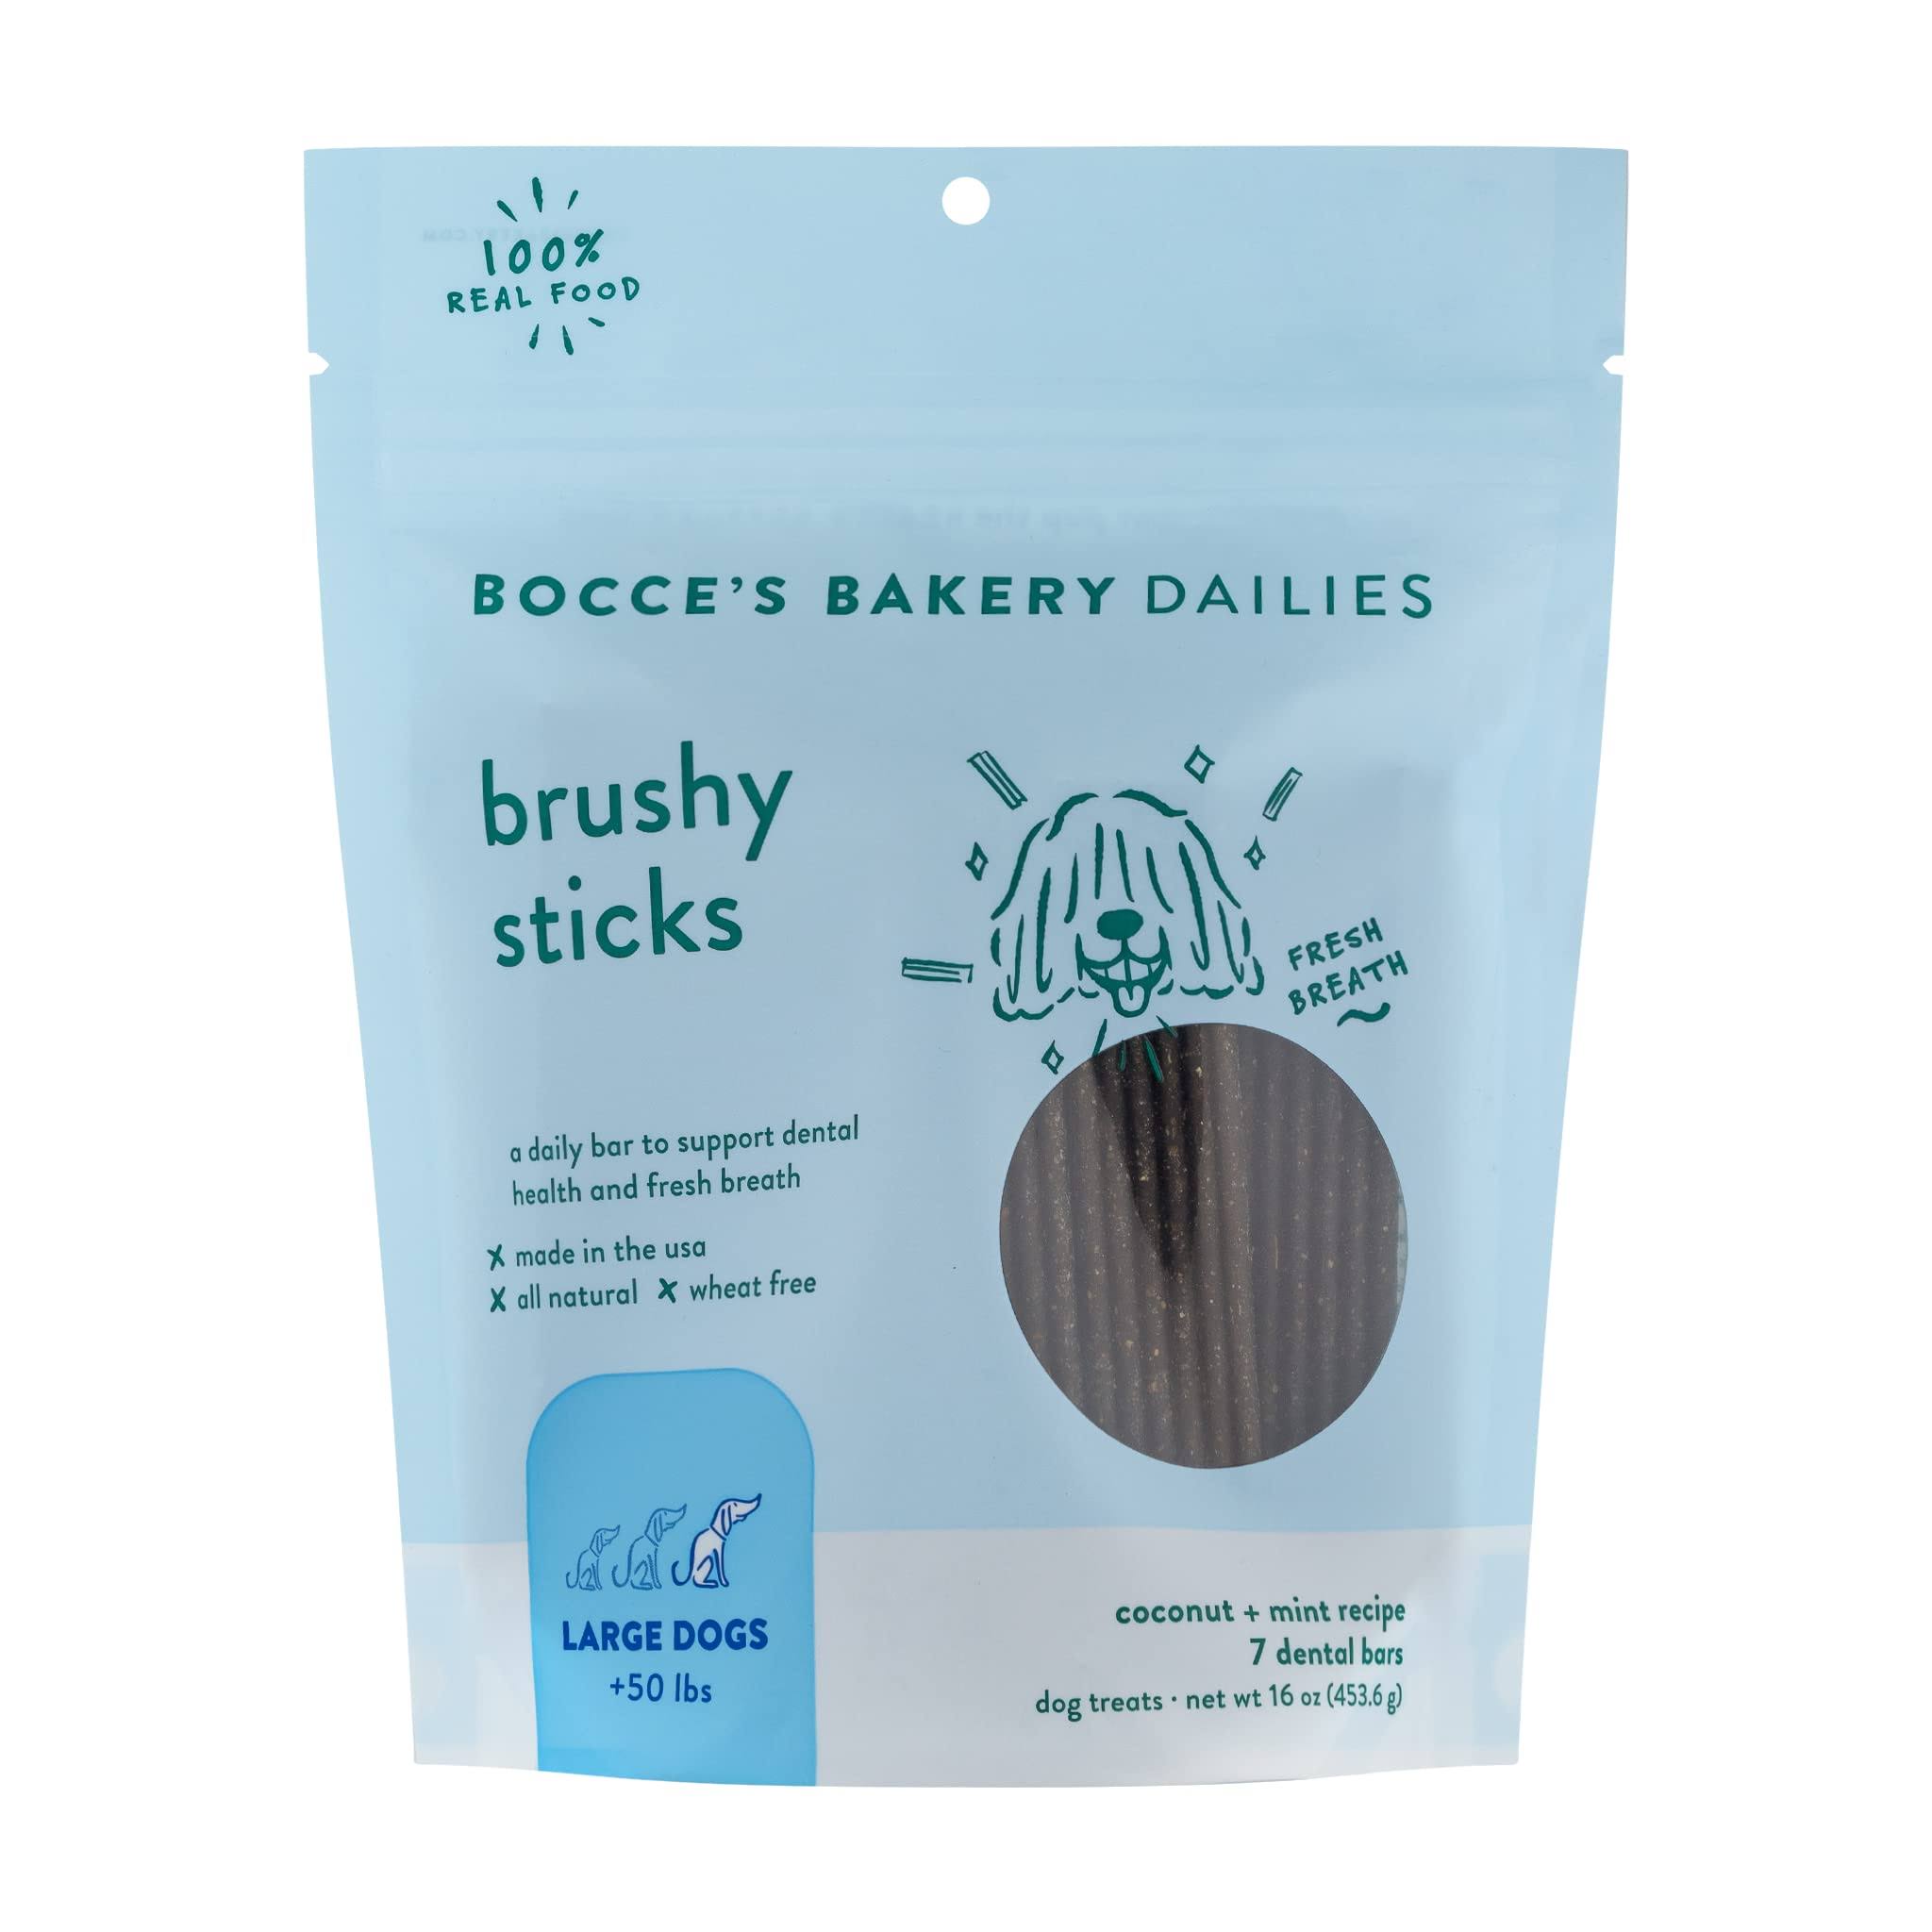 Bocce’s Bakery Dailies Brushy Sticks To Support Oral Health & Fresh Breath, Wheat-Free Dental Bars For Dogs, Made With Real Ingredients, Baked In Th